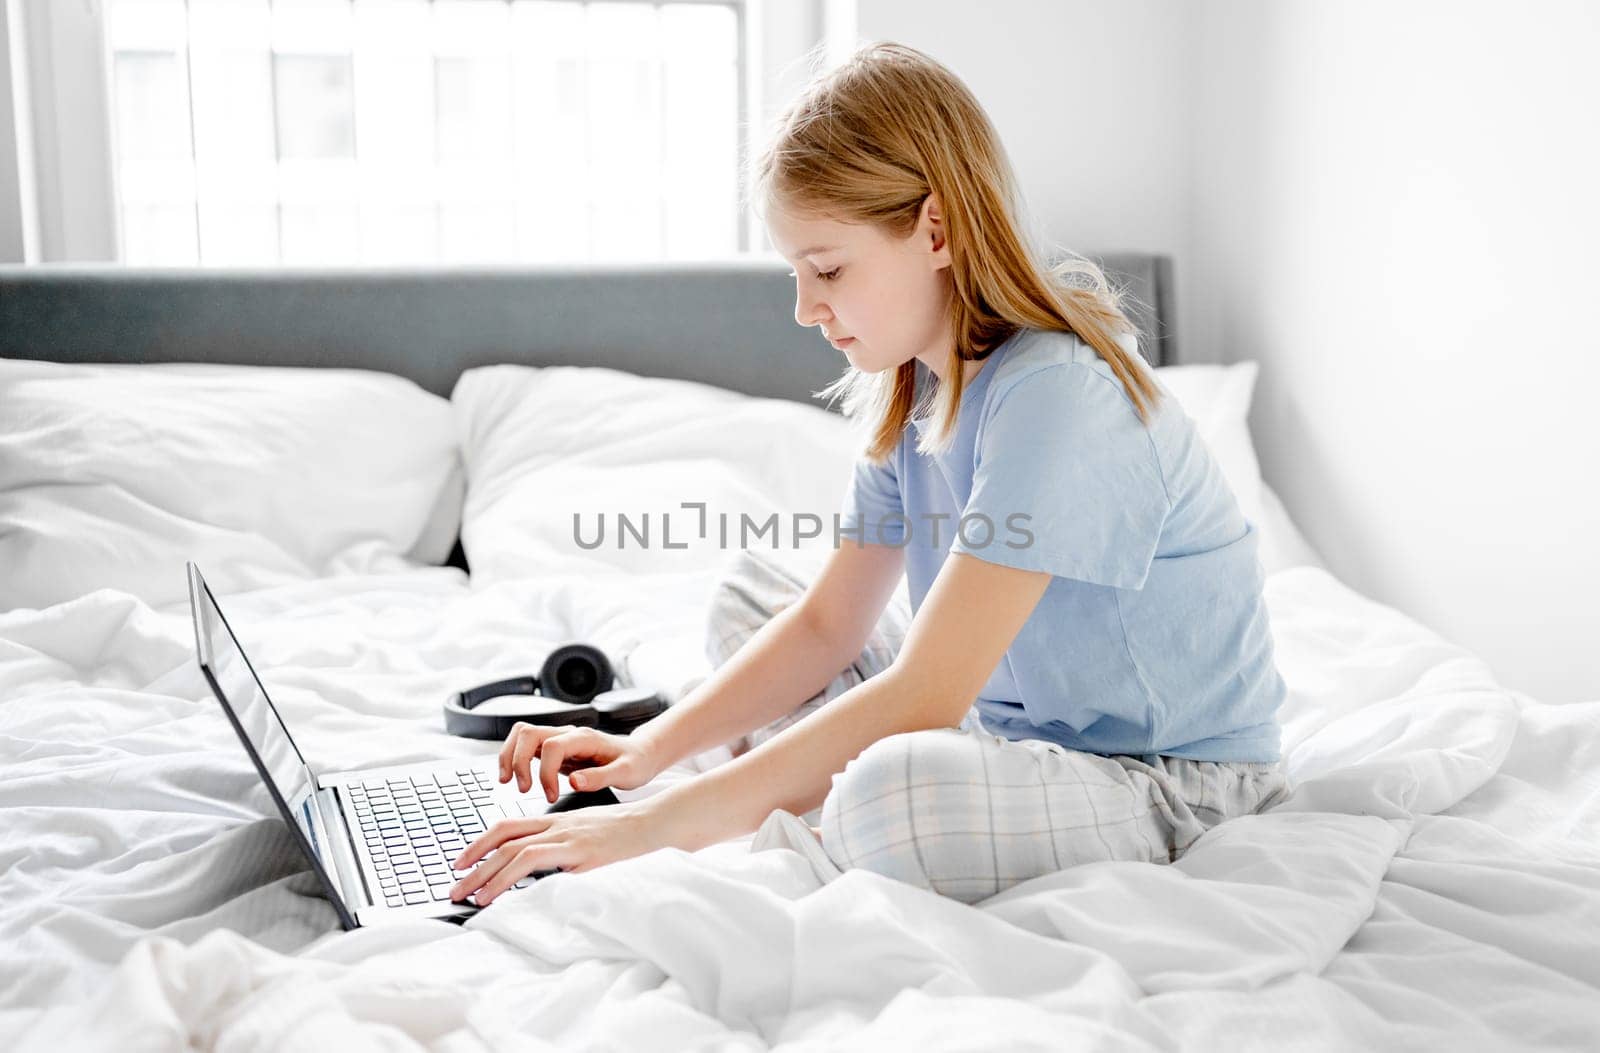 Girl Sitting In Bed With Laptop by tan4ikk1